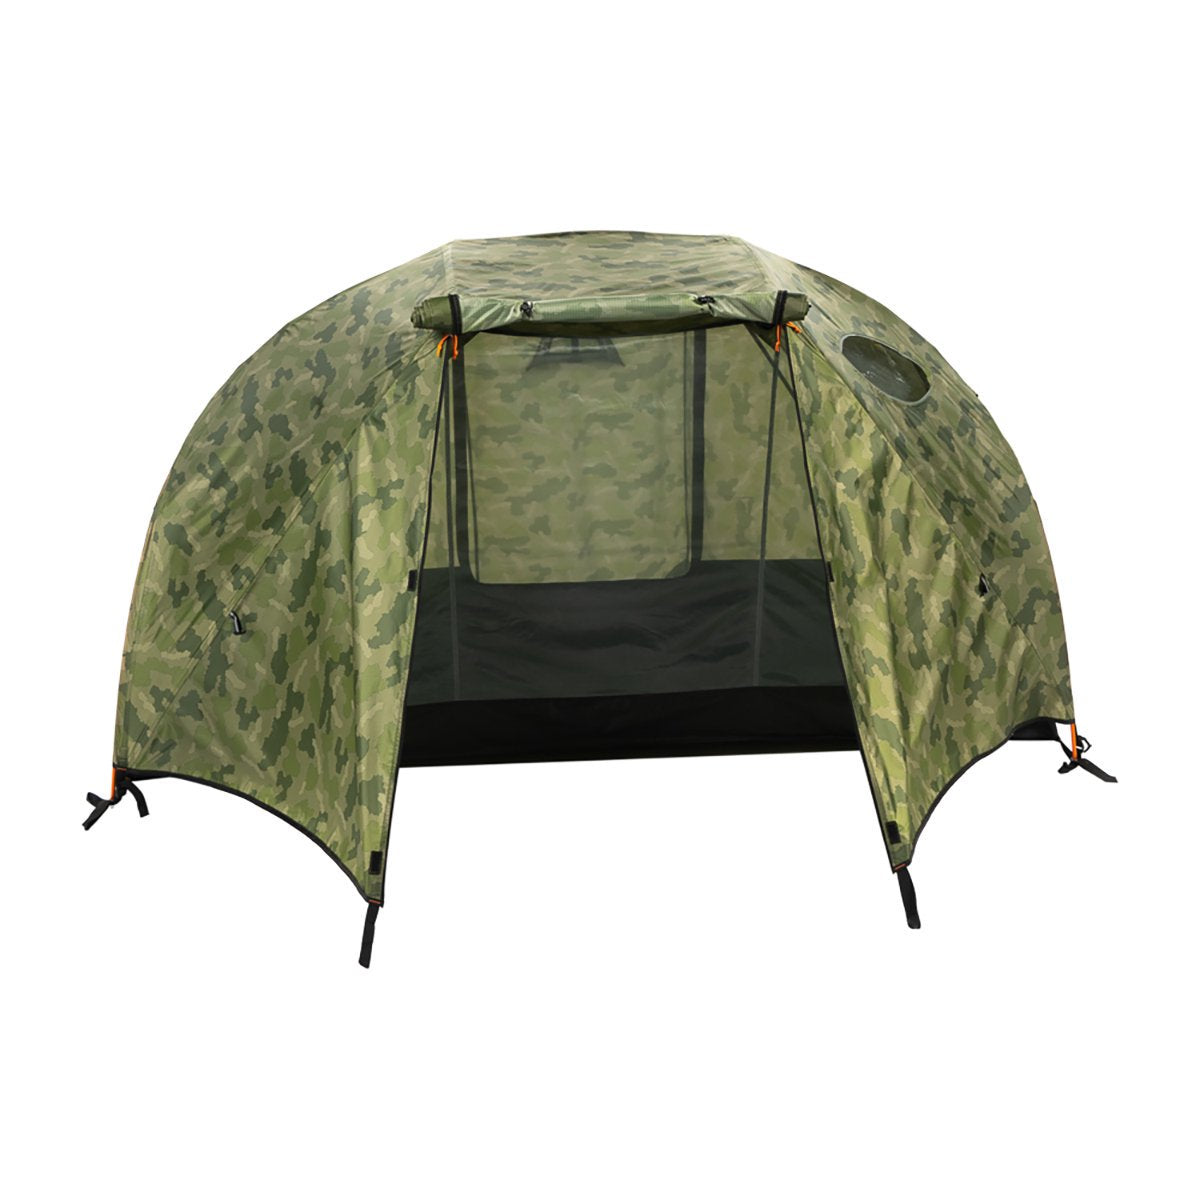 ONE PERSON TENT